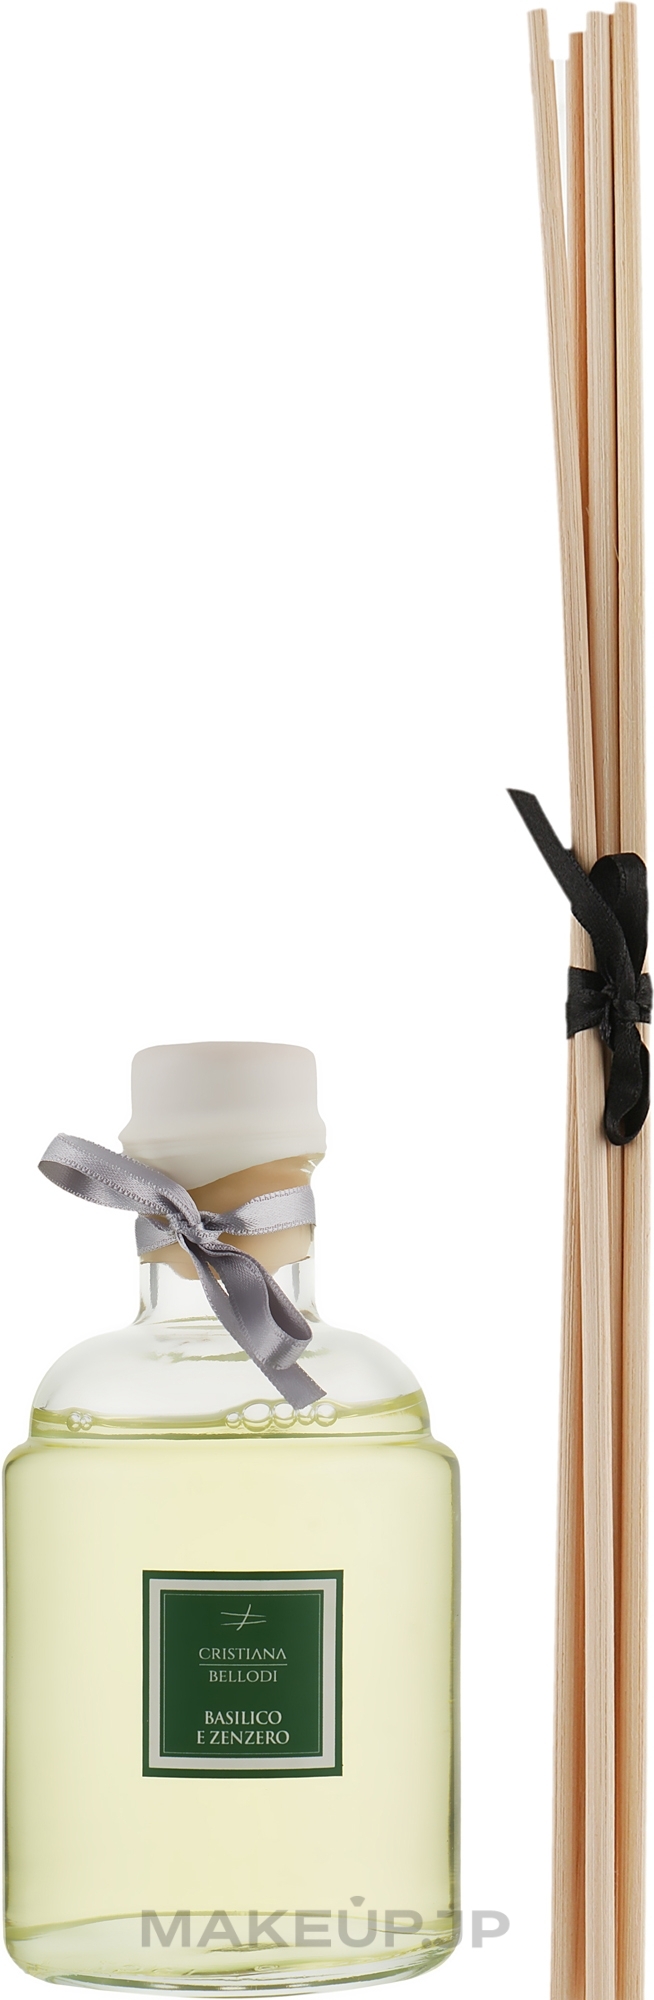 Reed Diffuser with Essential Oils & Alcohol 'Basil & Ginger' - Cristiana Bellodi Diffuser — photo 250 ml